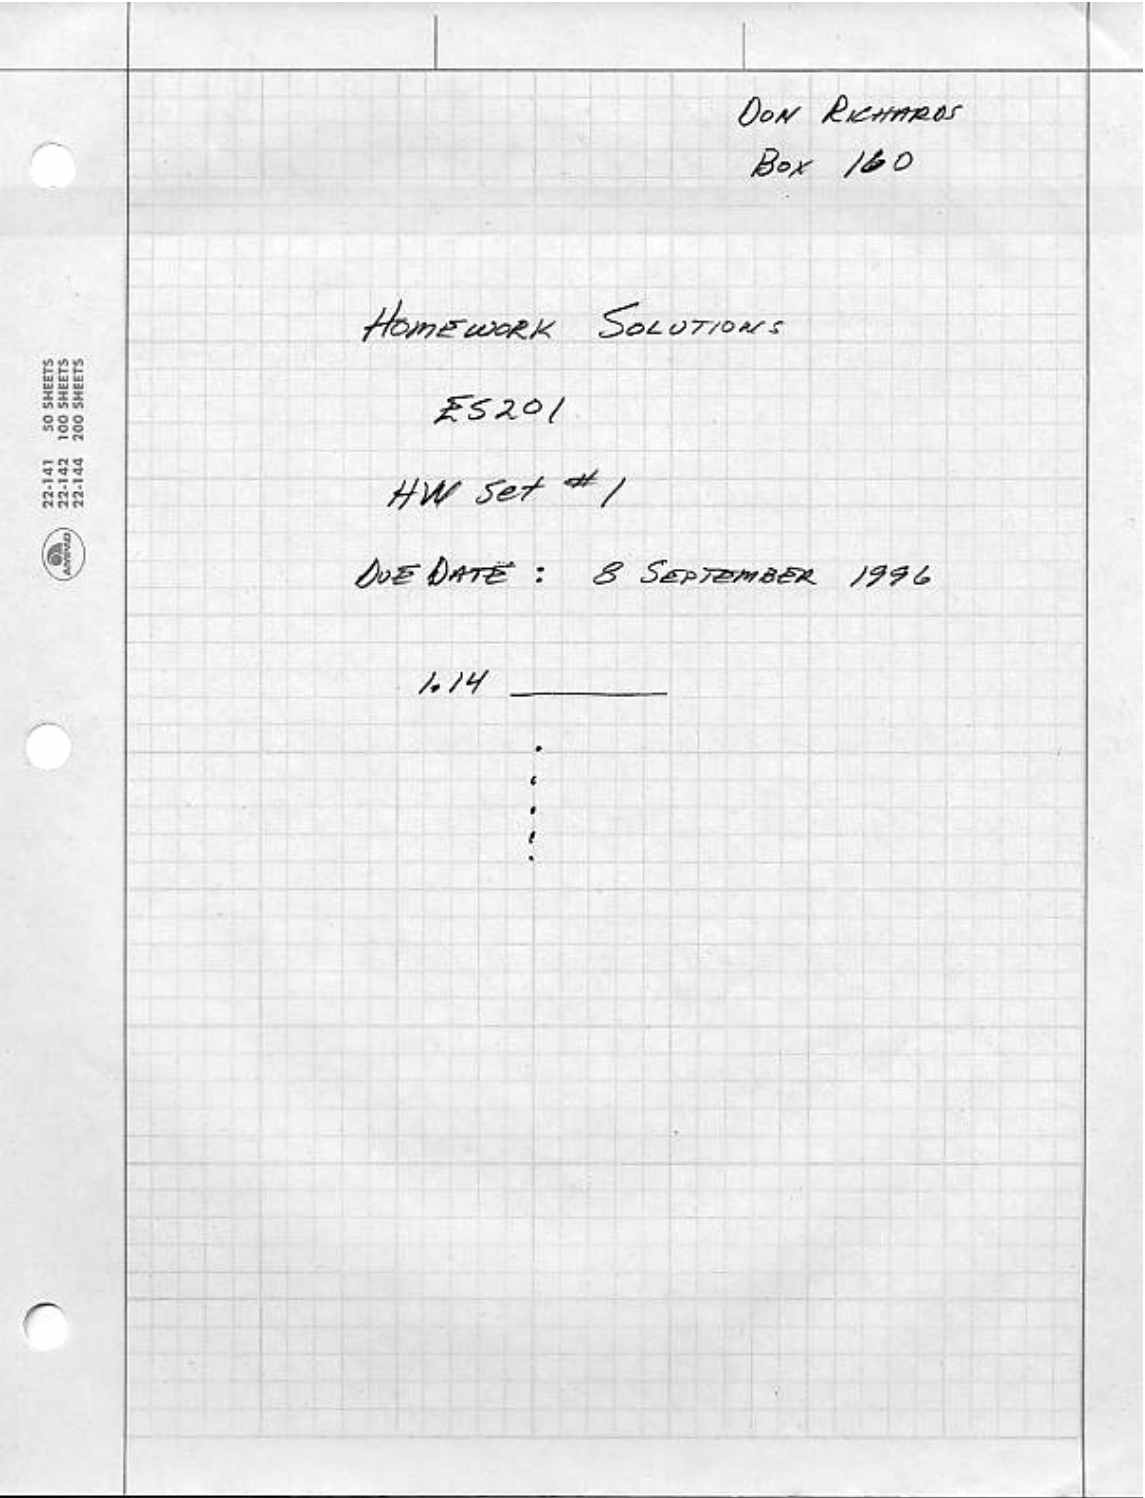 Cover sheet for solutions to Homework Set #1, created by Don Richards, due September 8, 1996.